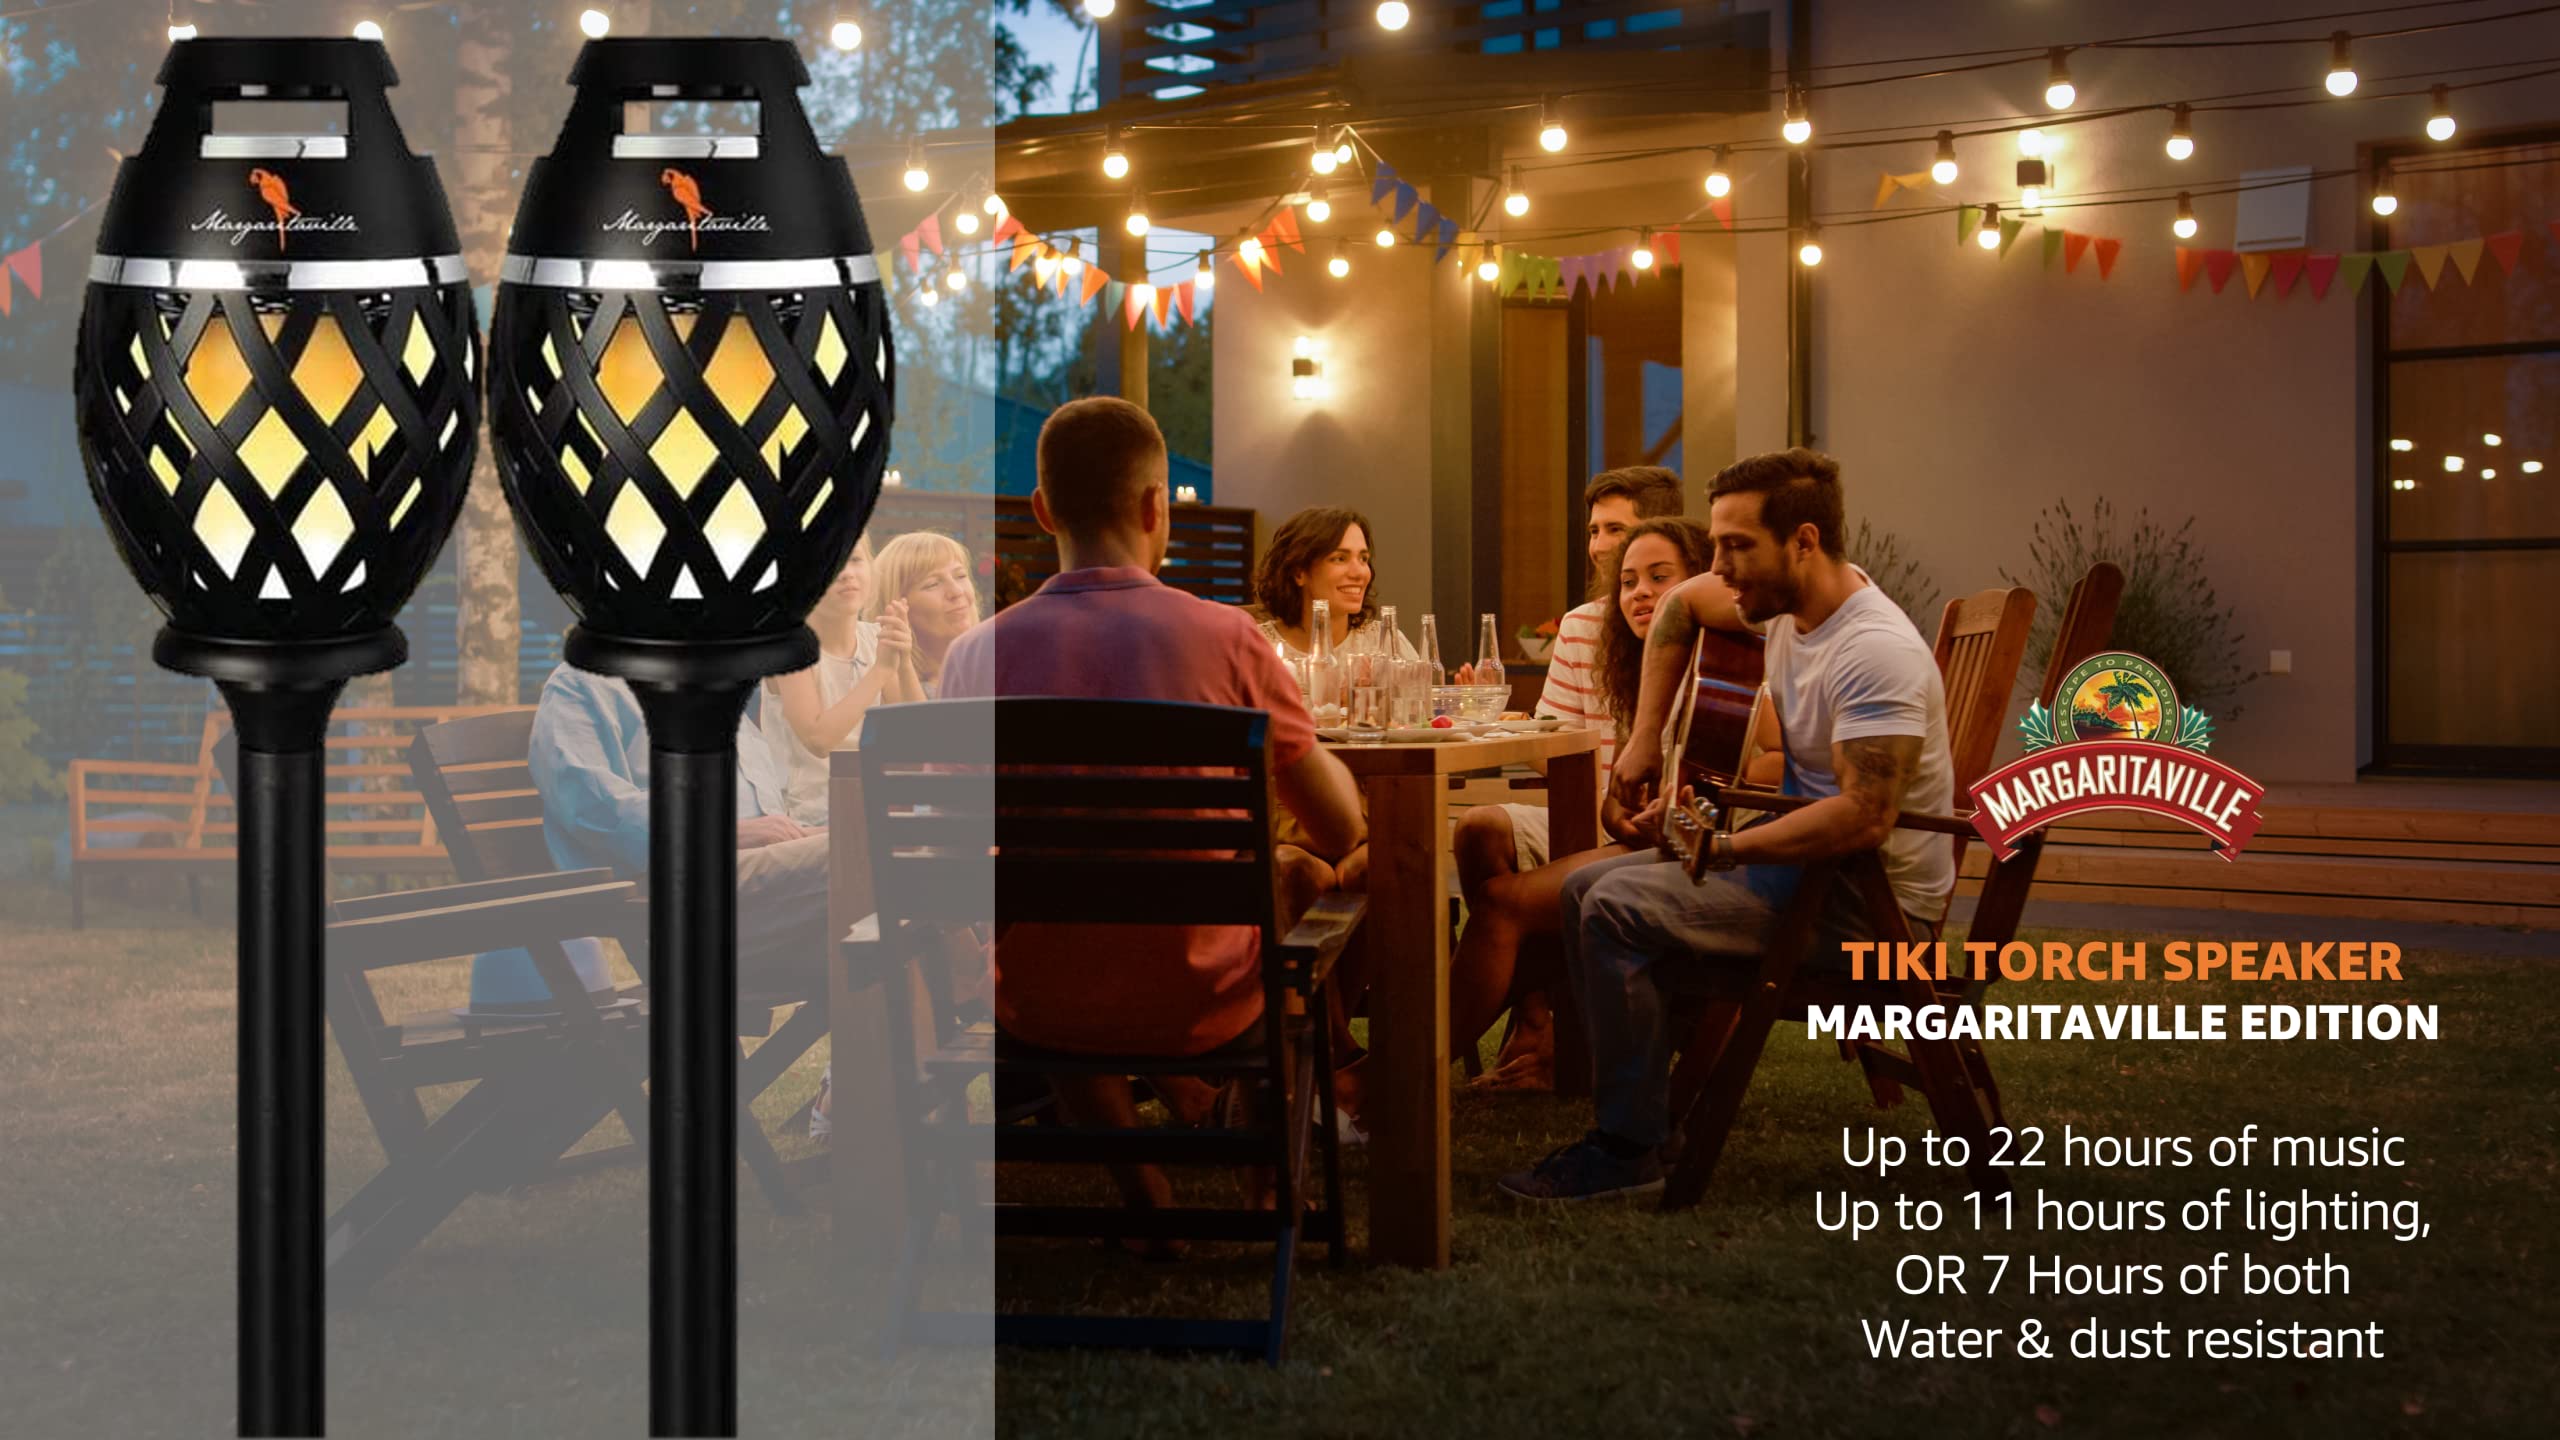 Margaritaville Tiki Torch - Waterproof Bluetooth Speaker, Portable Party Speaker with Flickering LED Lights, Perfect for Travel, Parties, Yards, and Pools (2 Pack)